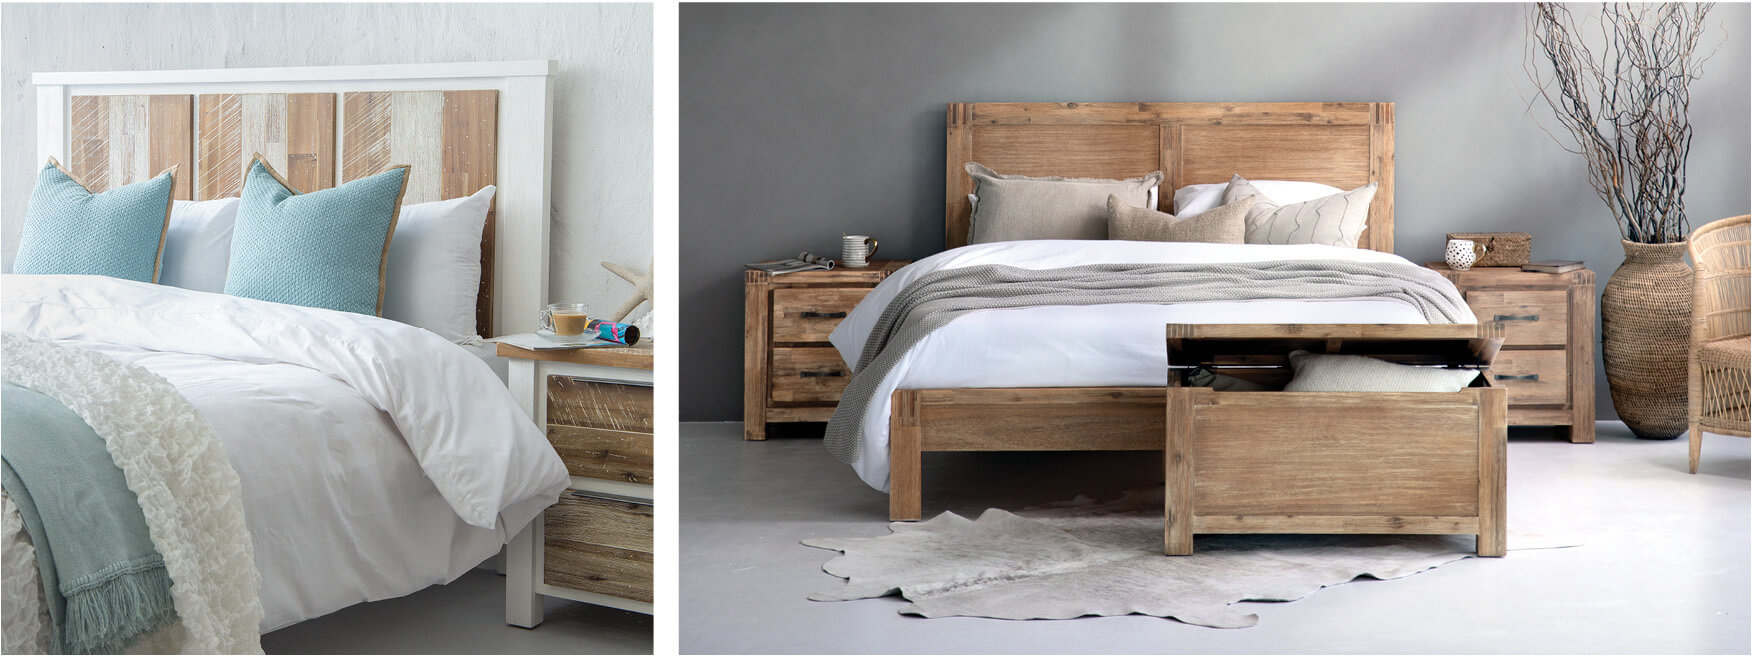 wooden beds and headboards